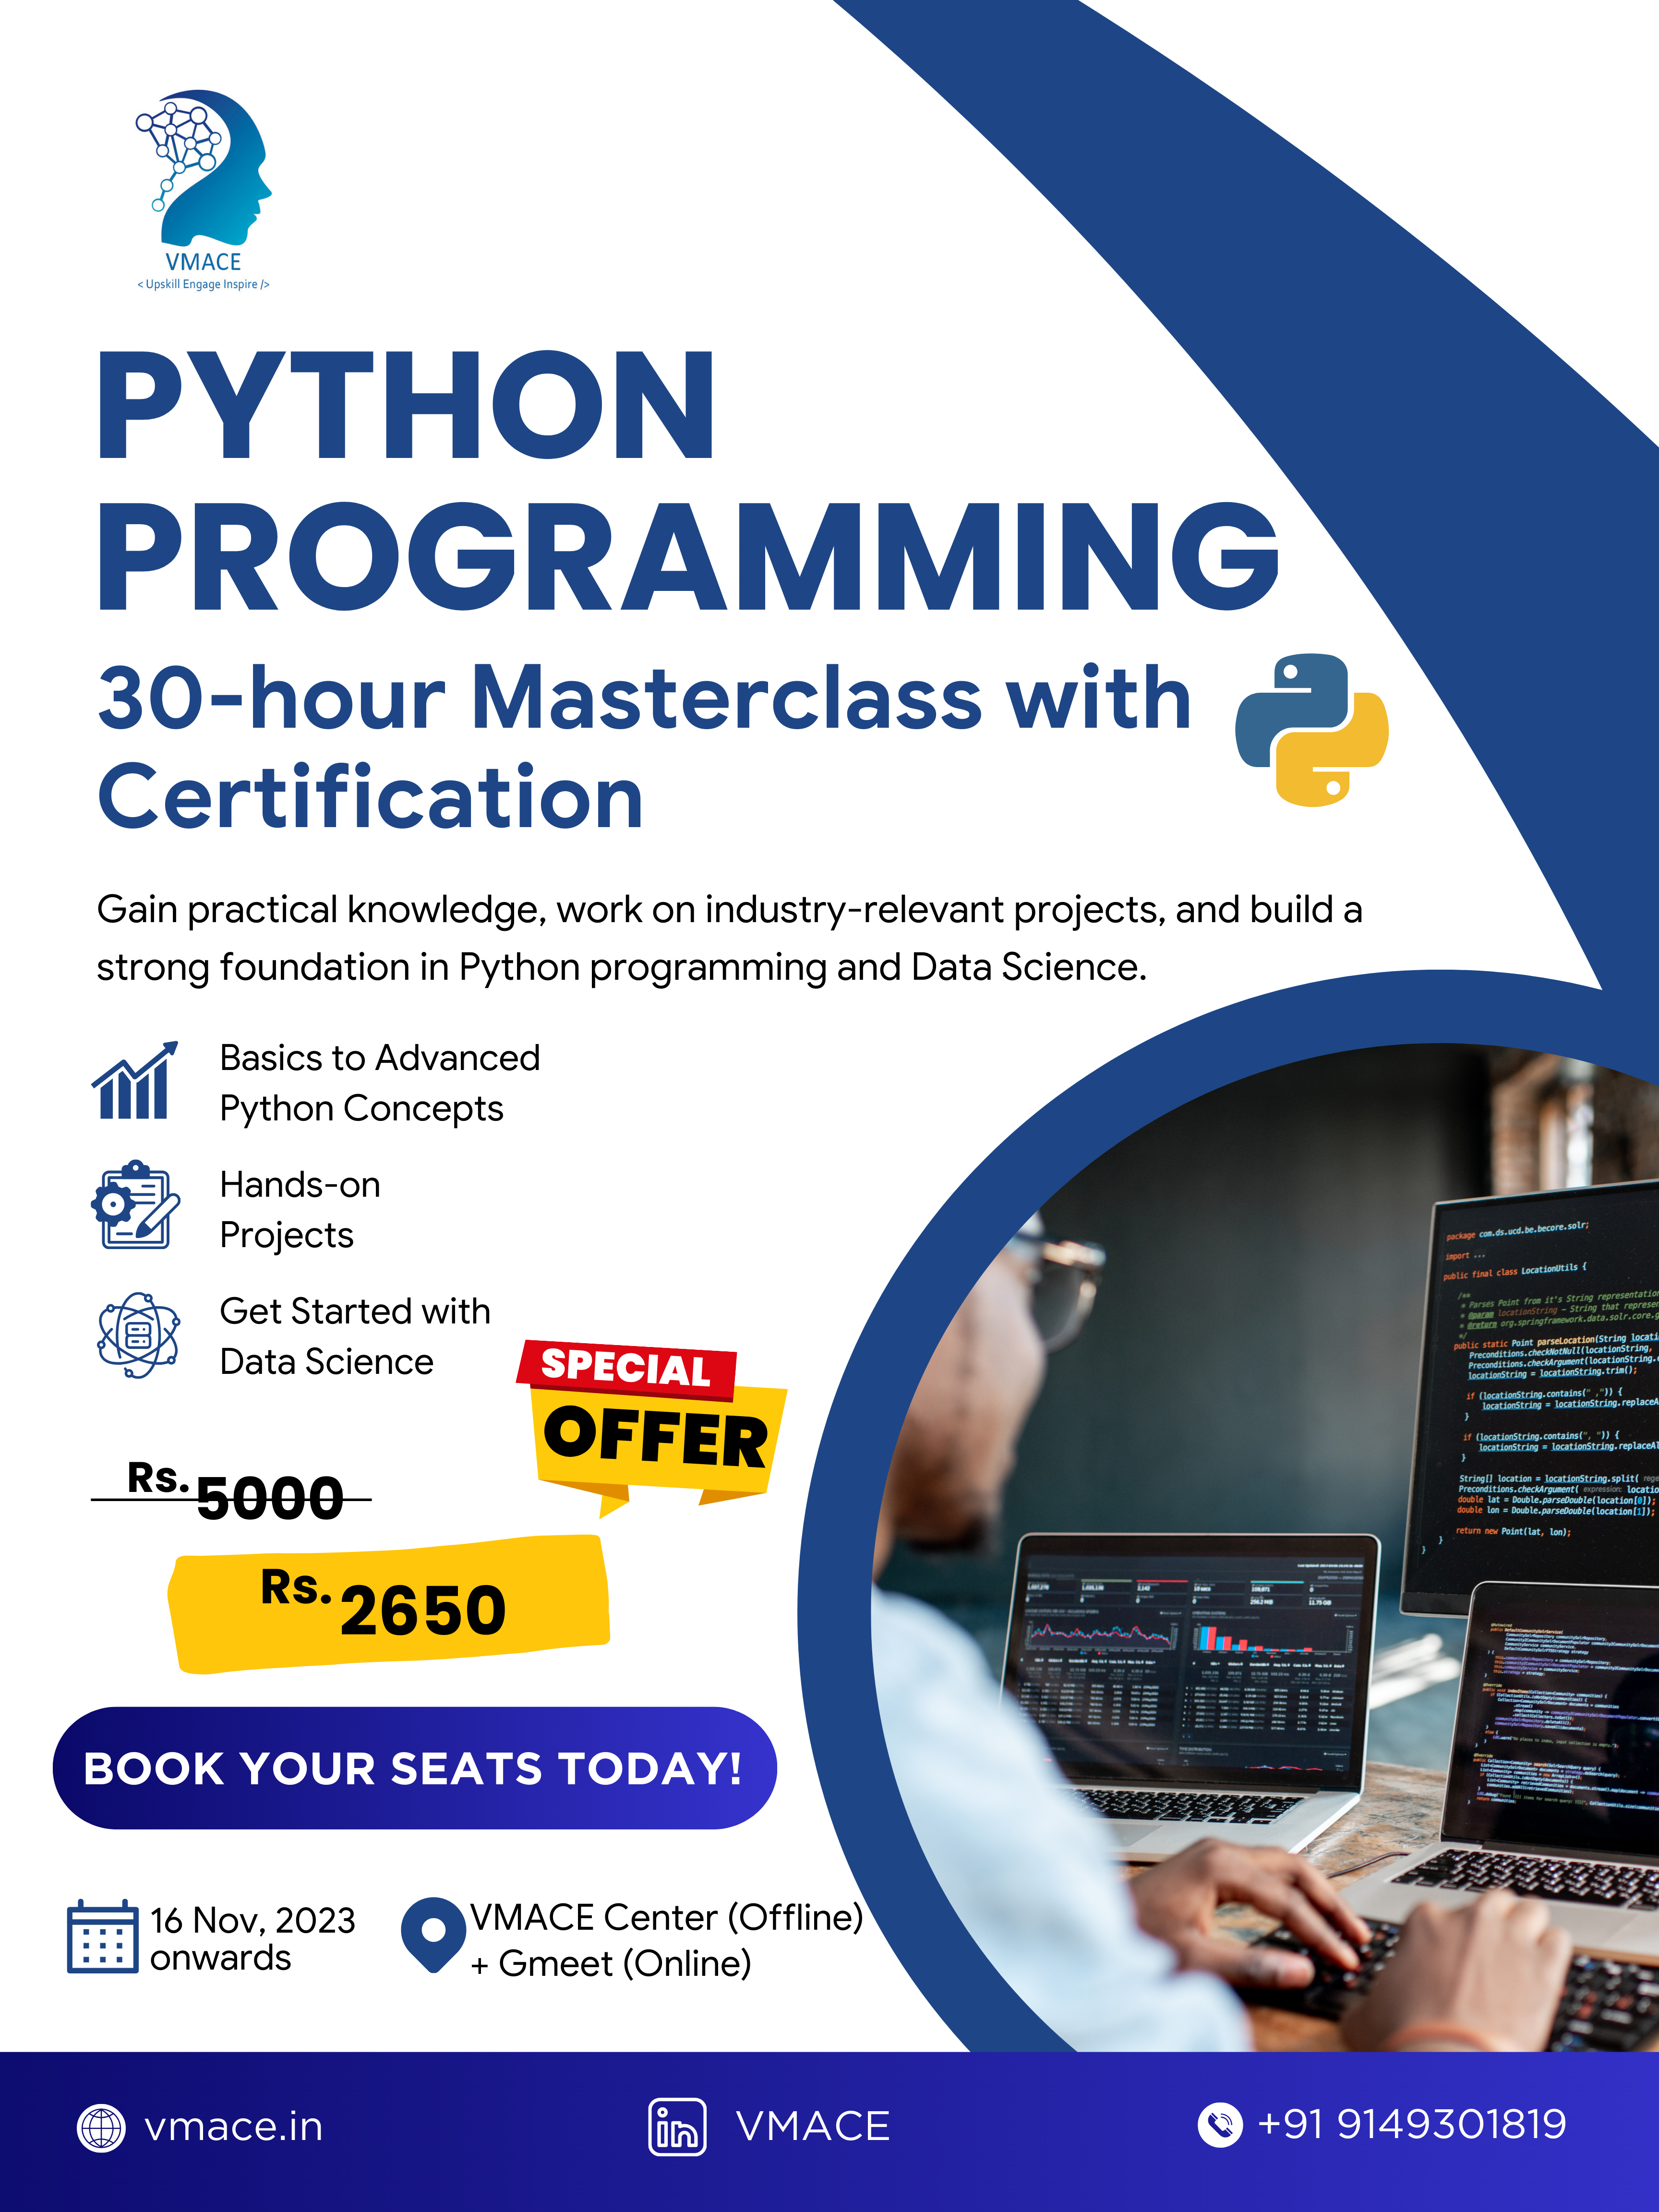 Python Masterclass at VMACE Institute